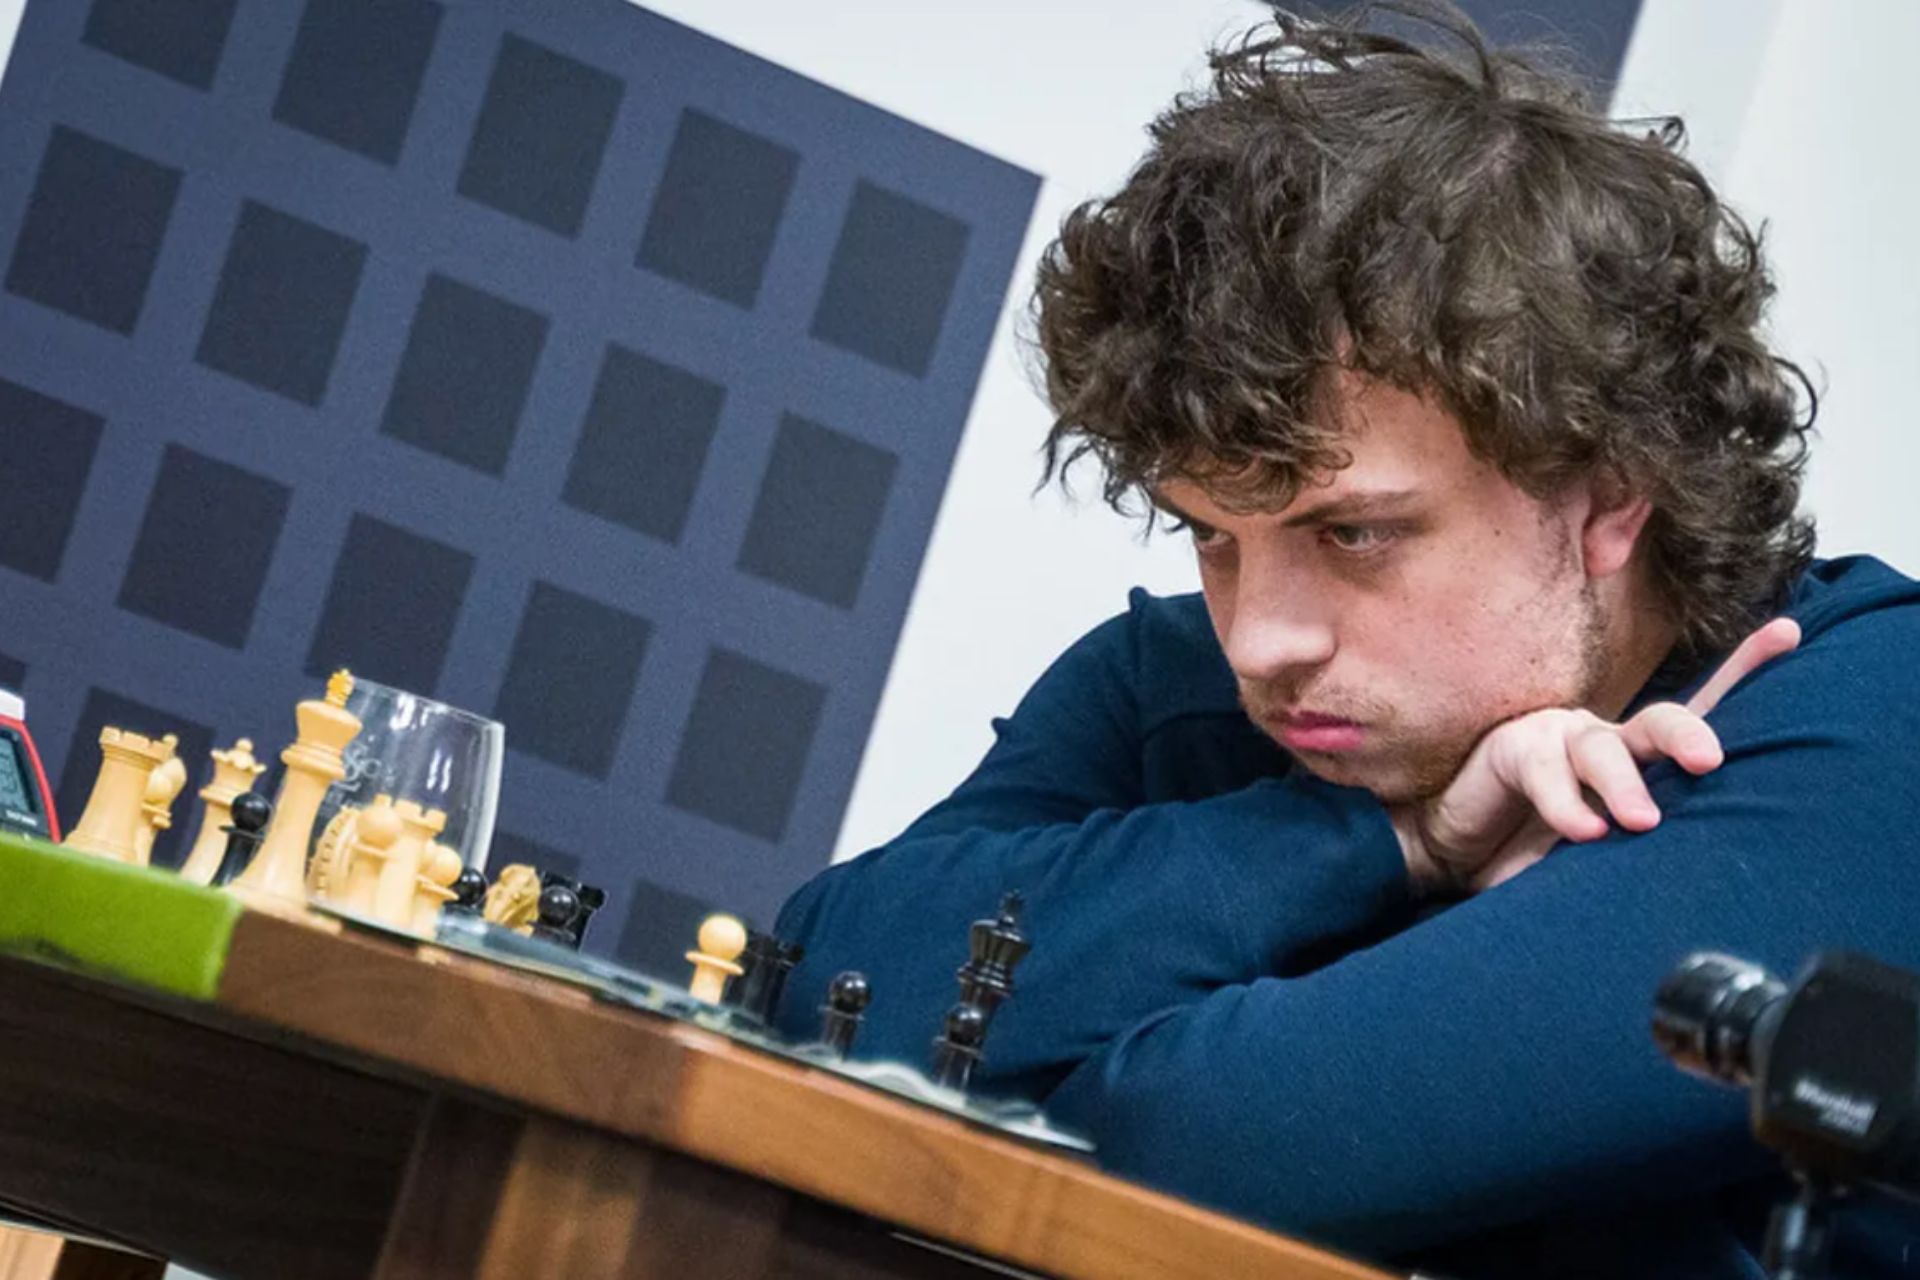 So Suffers At Sinquefield; Carlsen Misses Another Win 